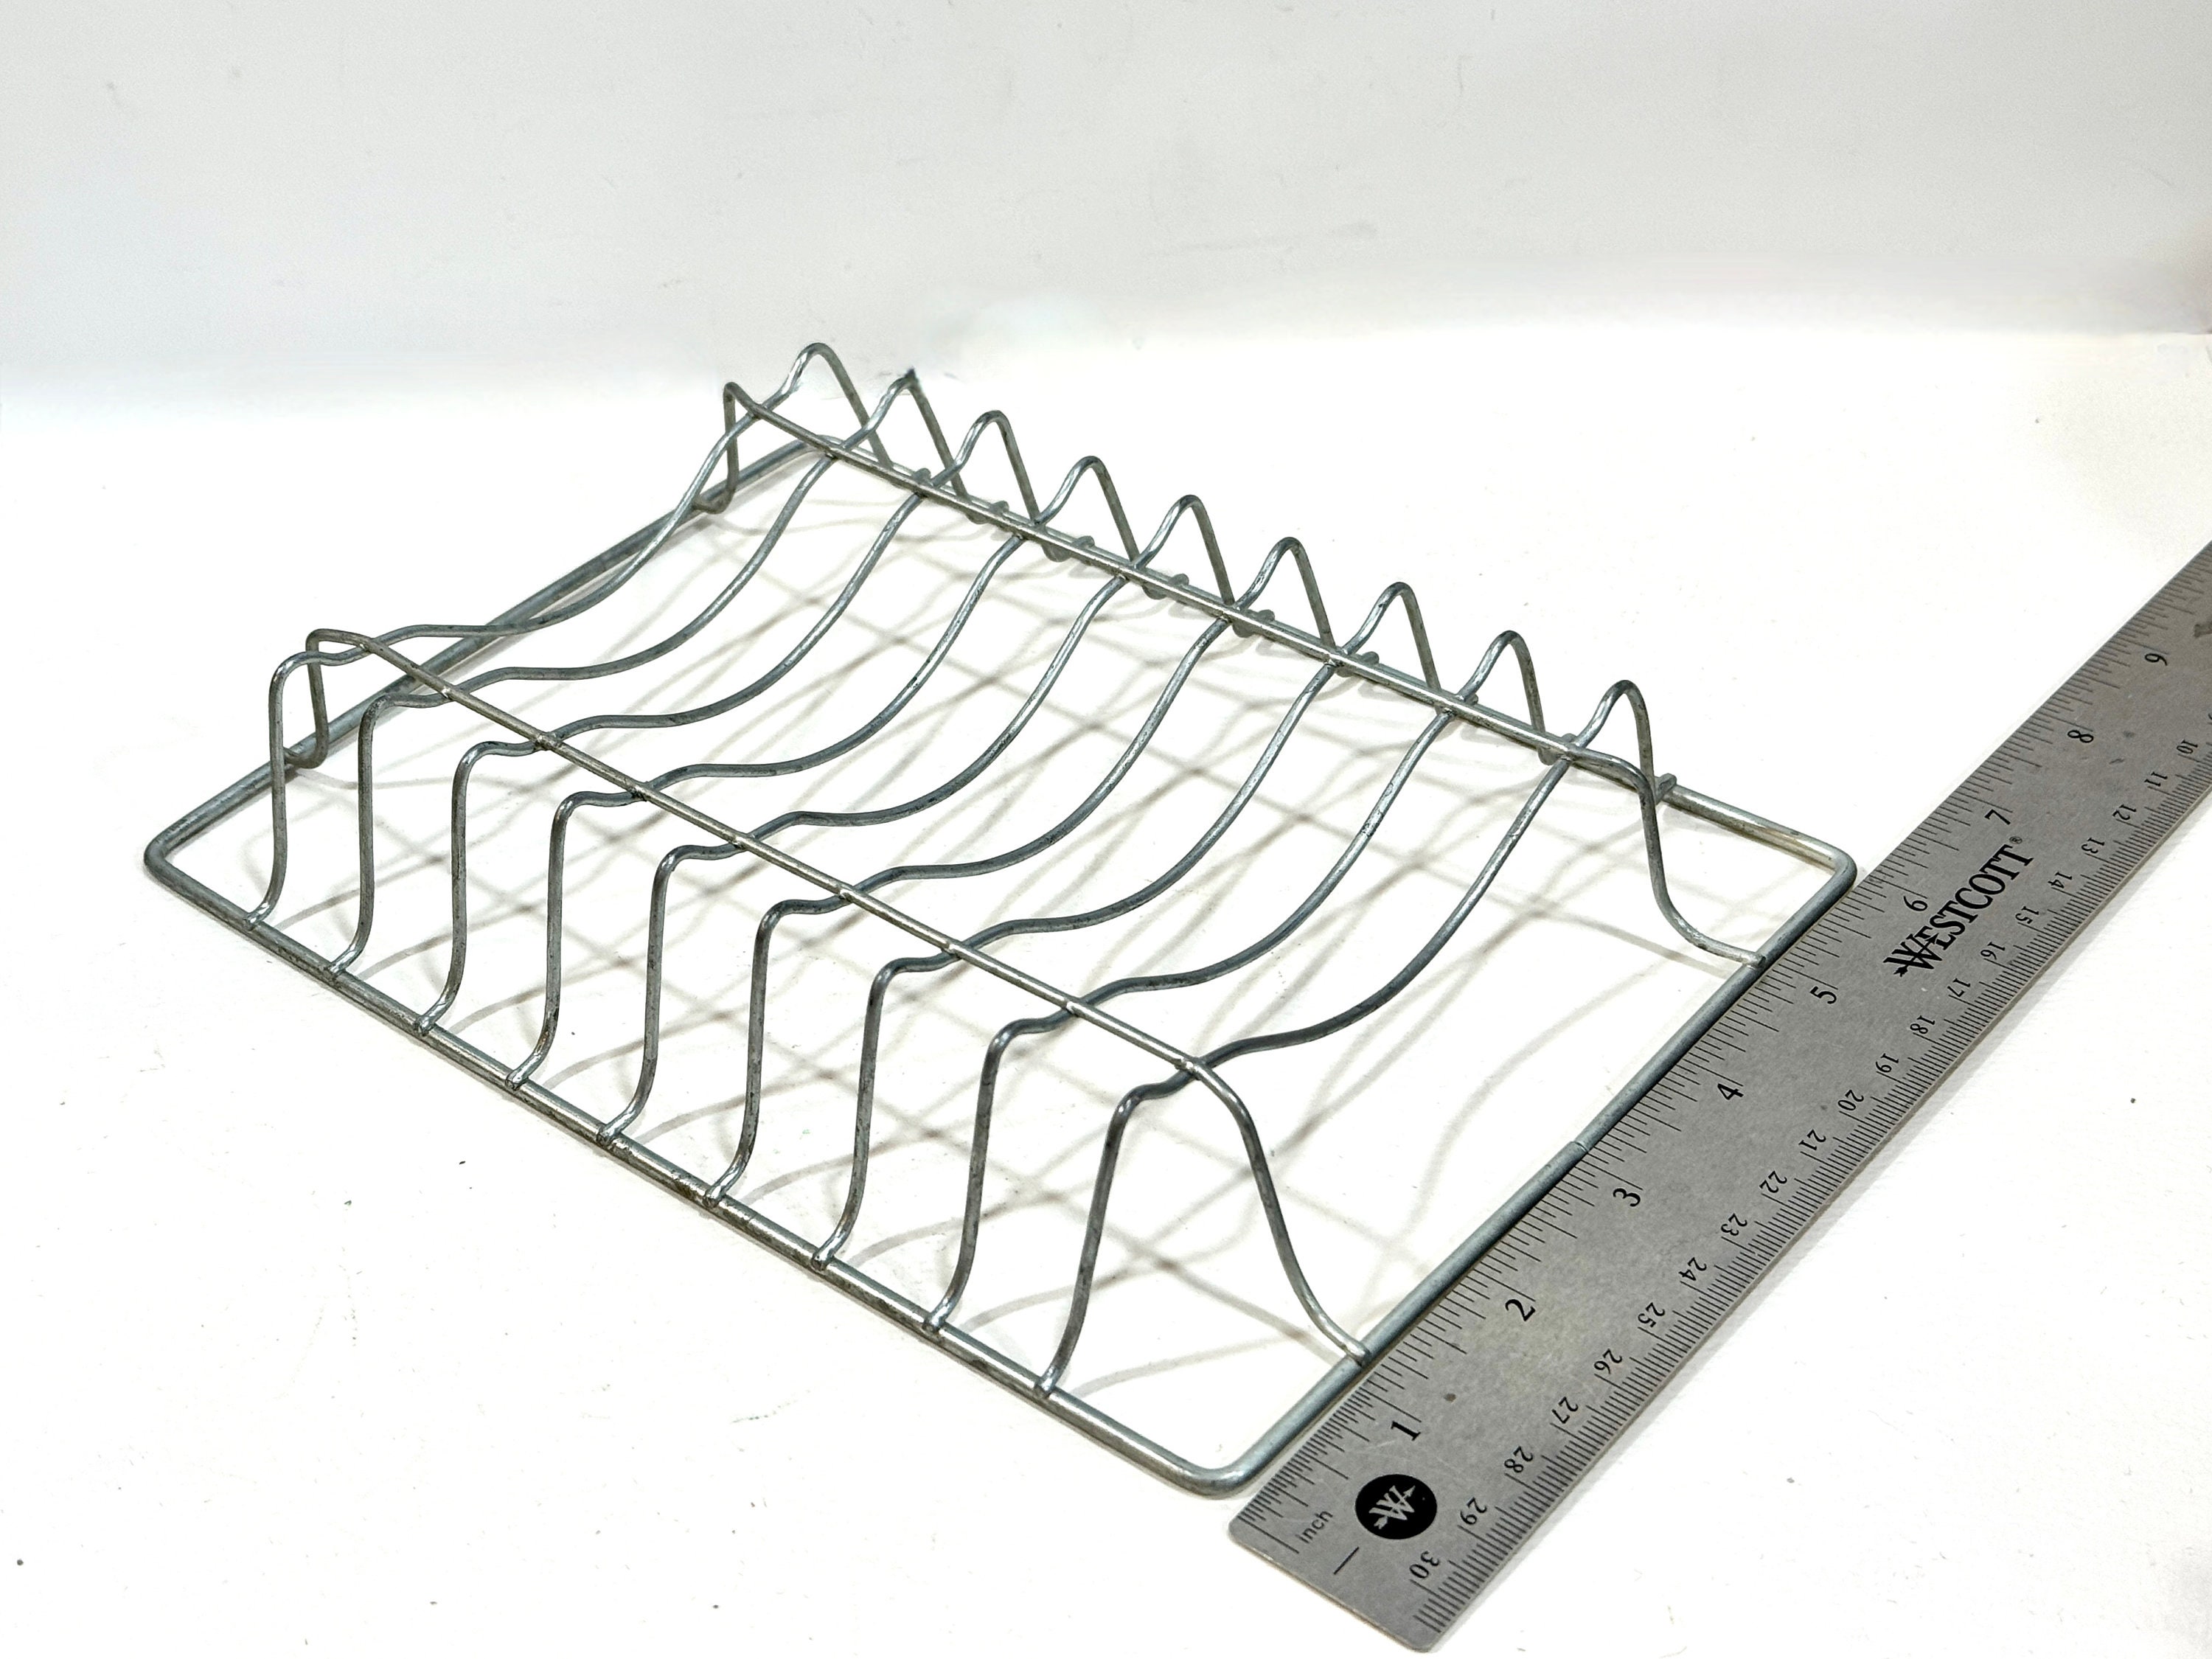 Vintage Toy, Wire Dish Drainer, Rubbermaid Drainer, Toy Drying